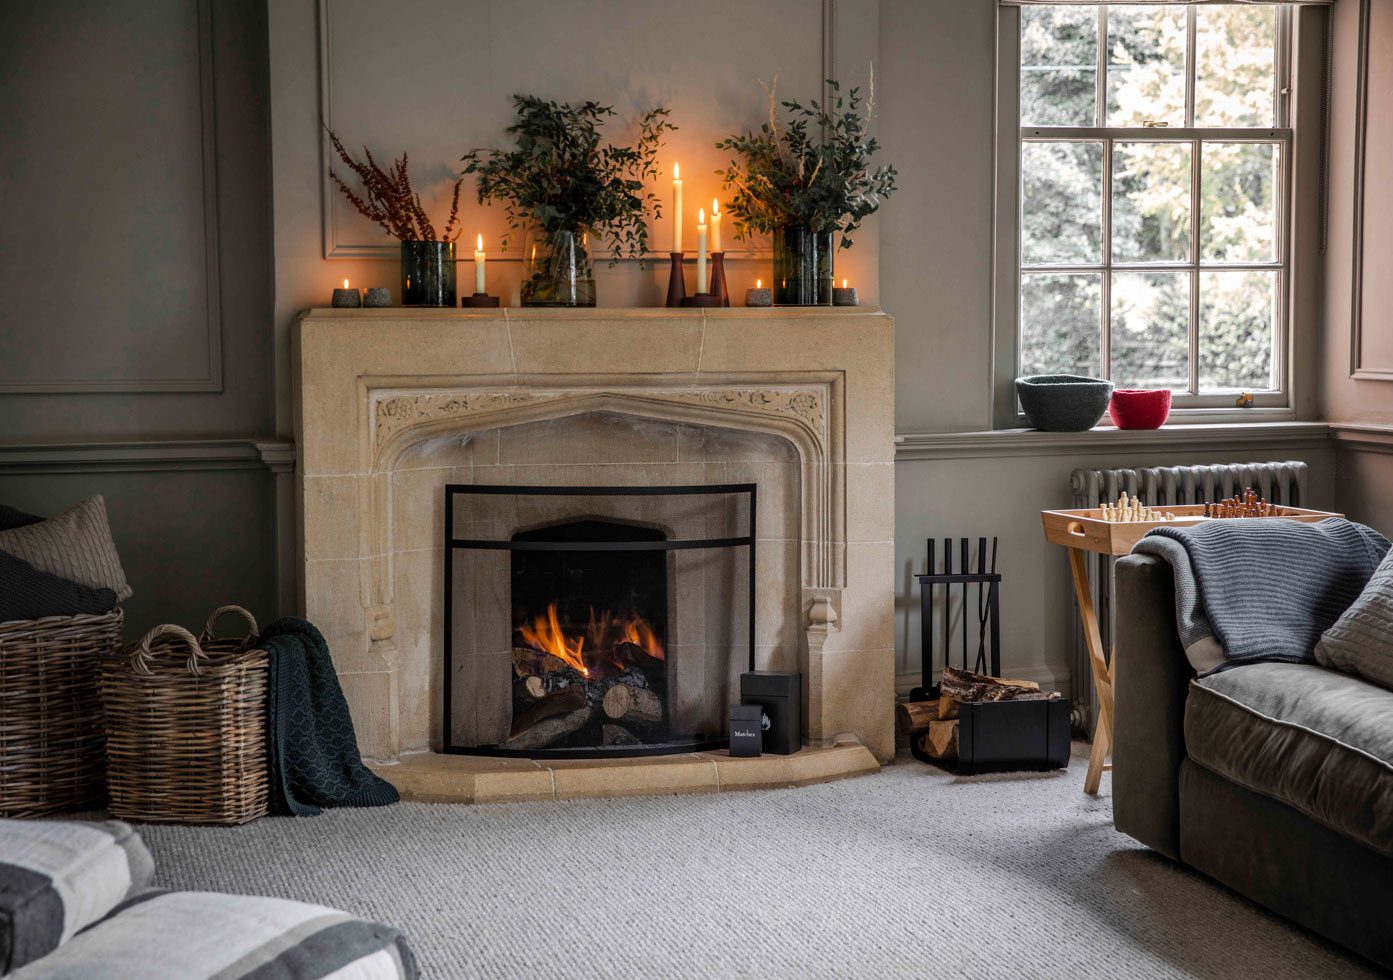 Opening Up A Fireplace Costs Regs And, How Much Does It Cost To Add A Fireplace